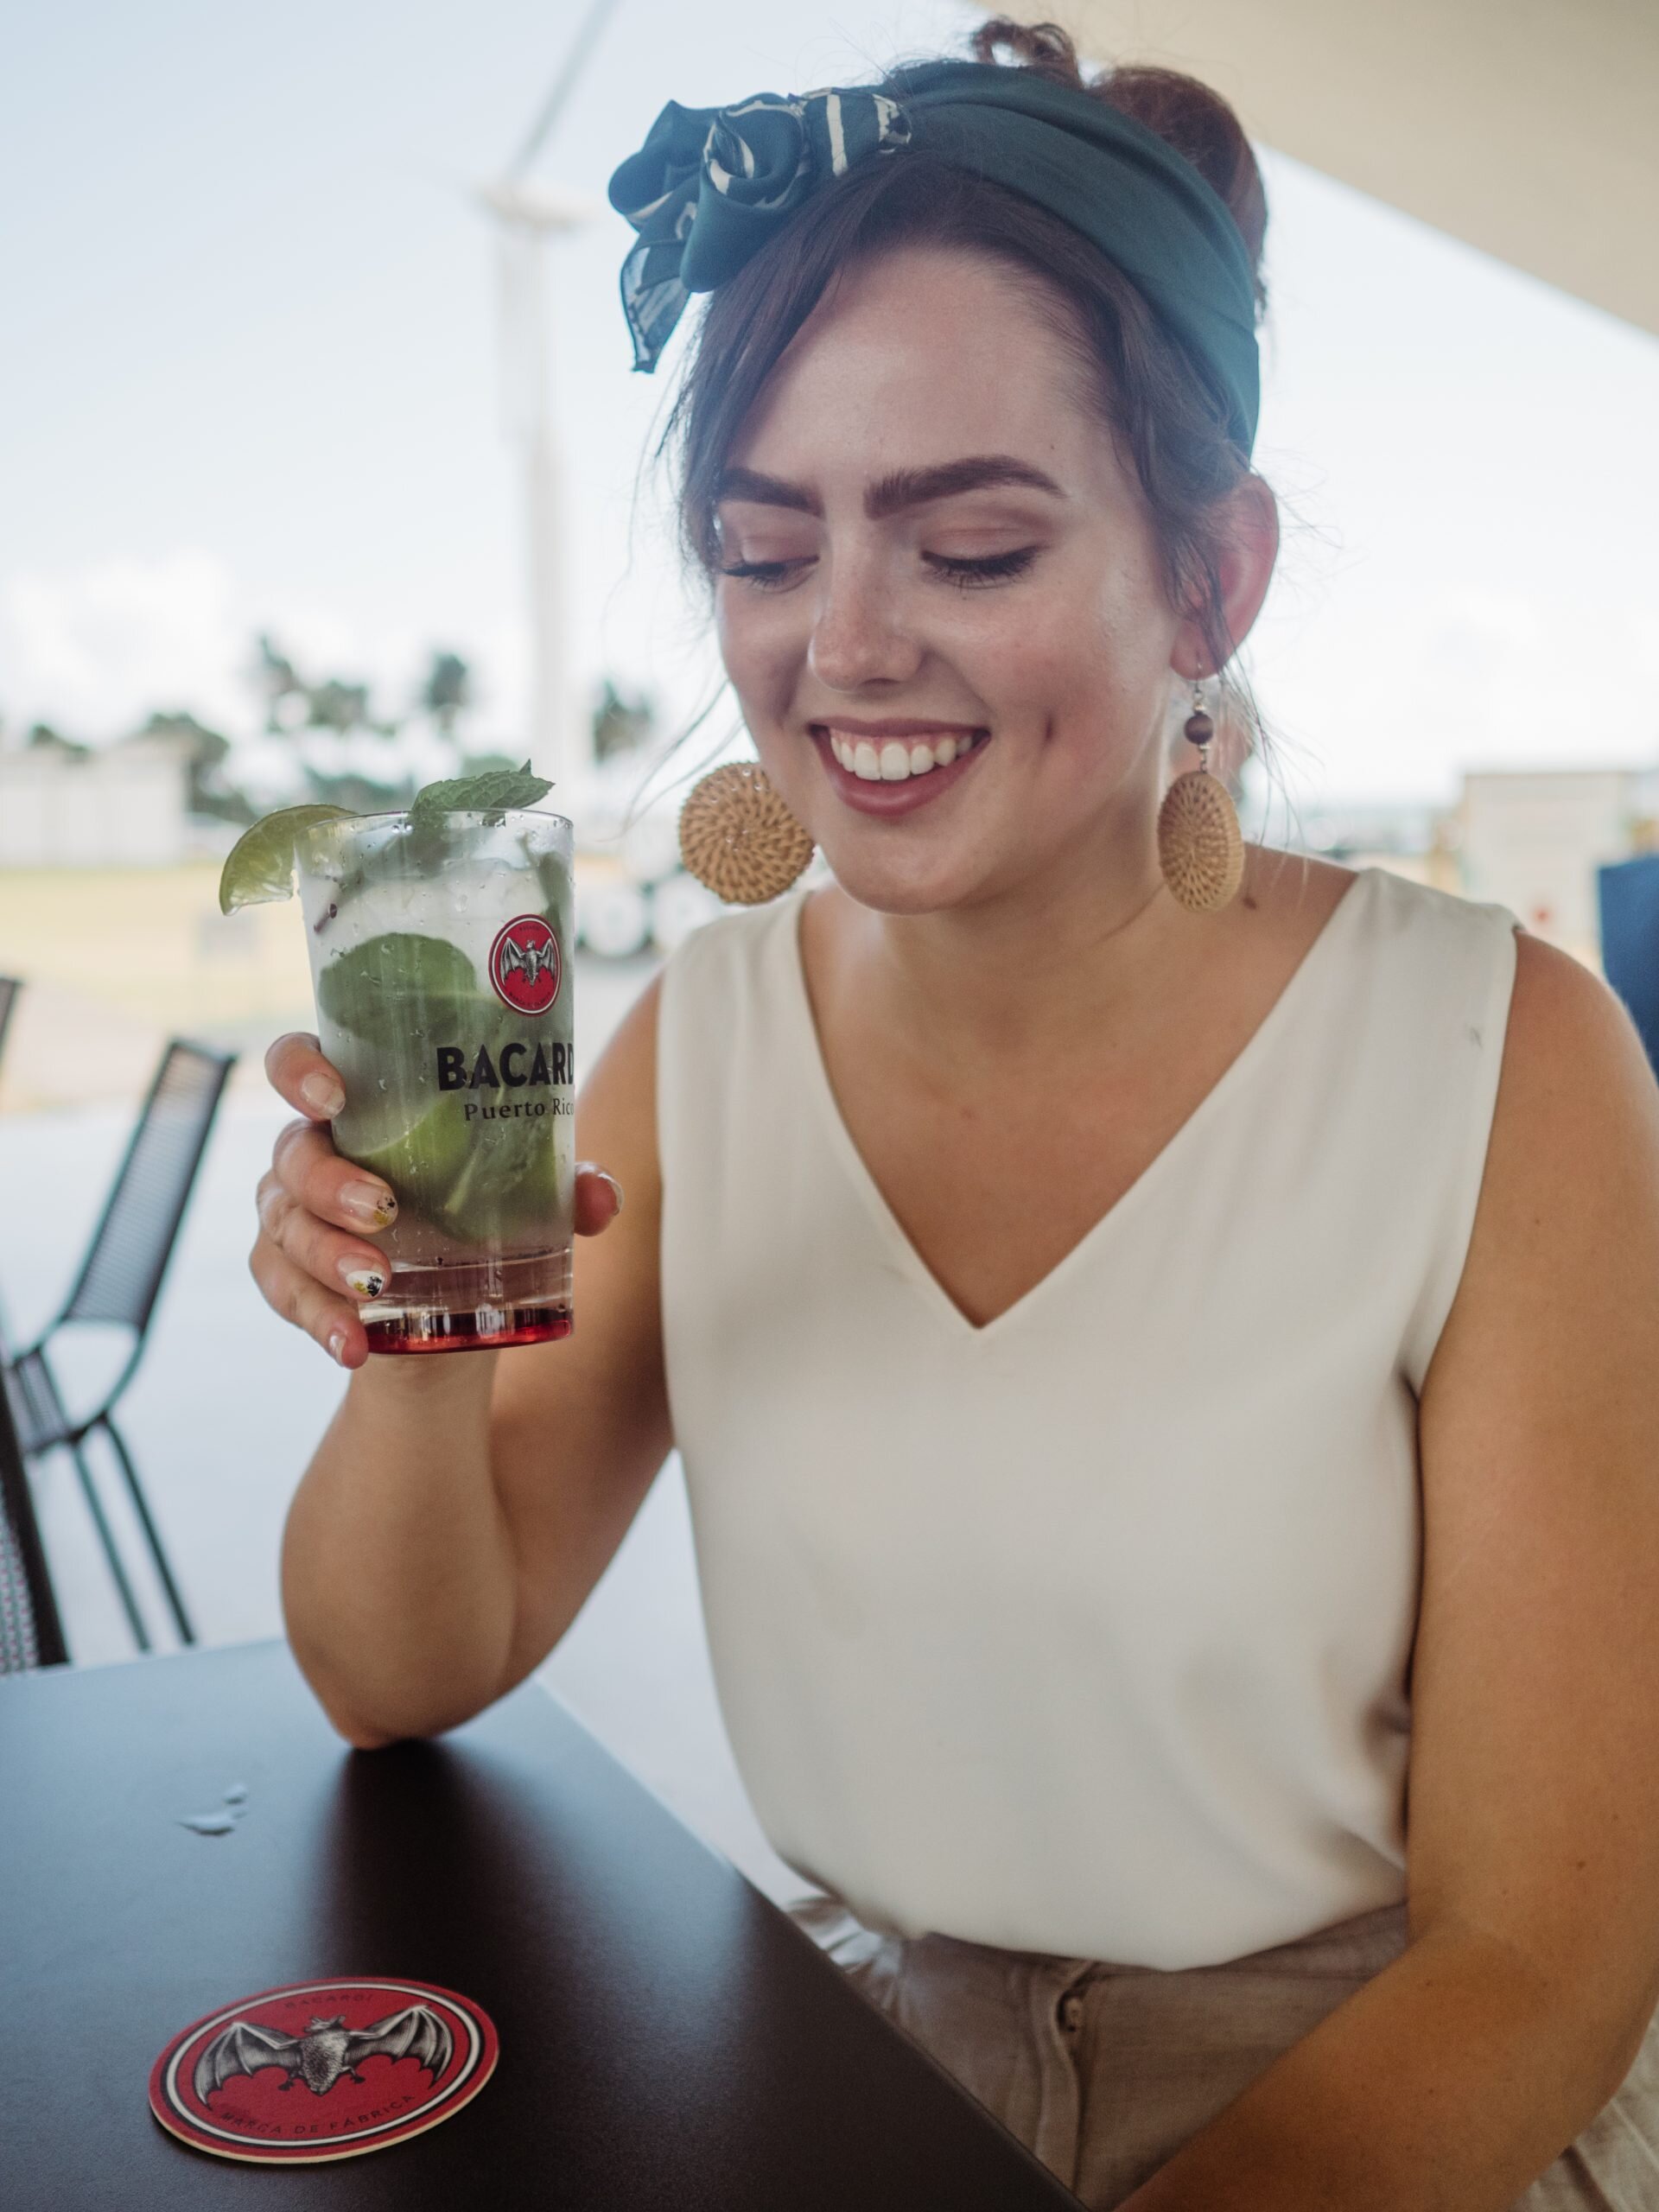 Drinking Bacardi mojitos at the distillery in Puerto Rico wearing a white blouse and headscarf and wooden circular earrings